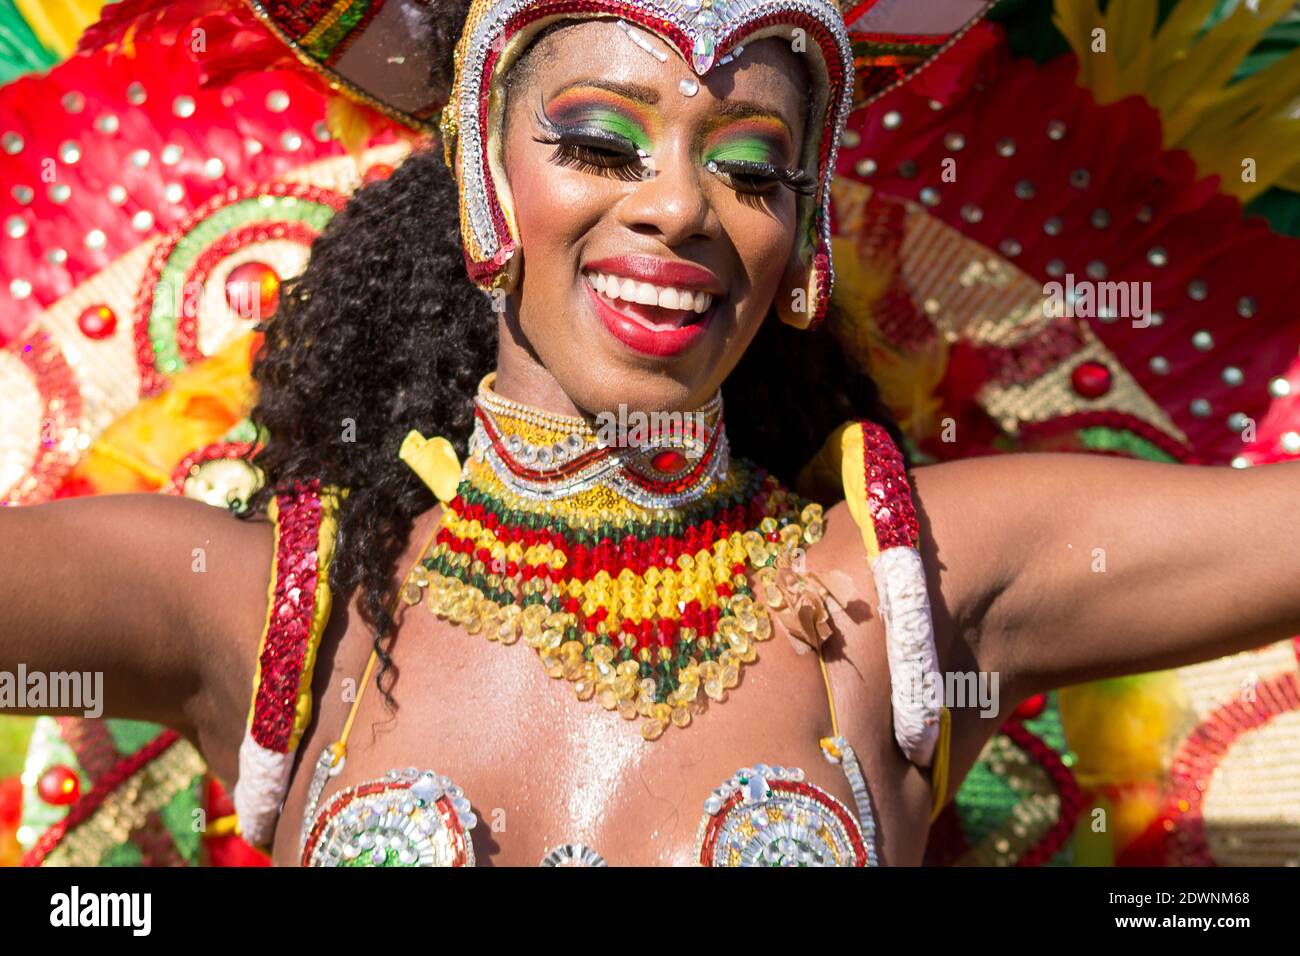 BARRANQU, COLOMBIA - Feb 13, 2018: The comparsa parades their traditional colorful costumes at the Barranquilla carnival Stock Photo